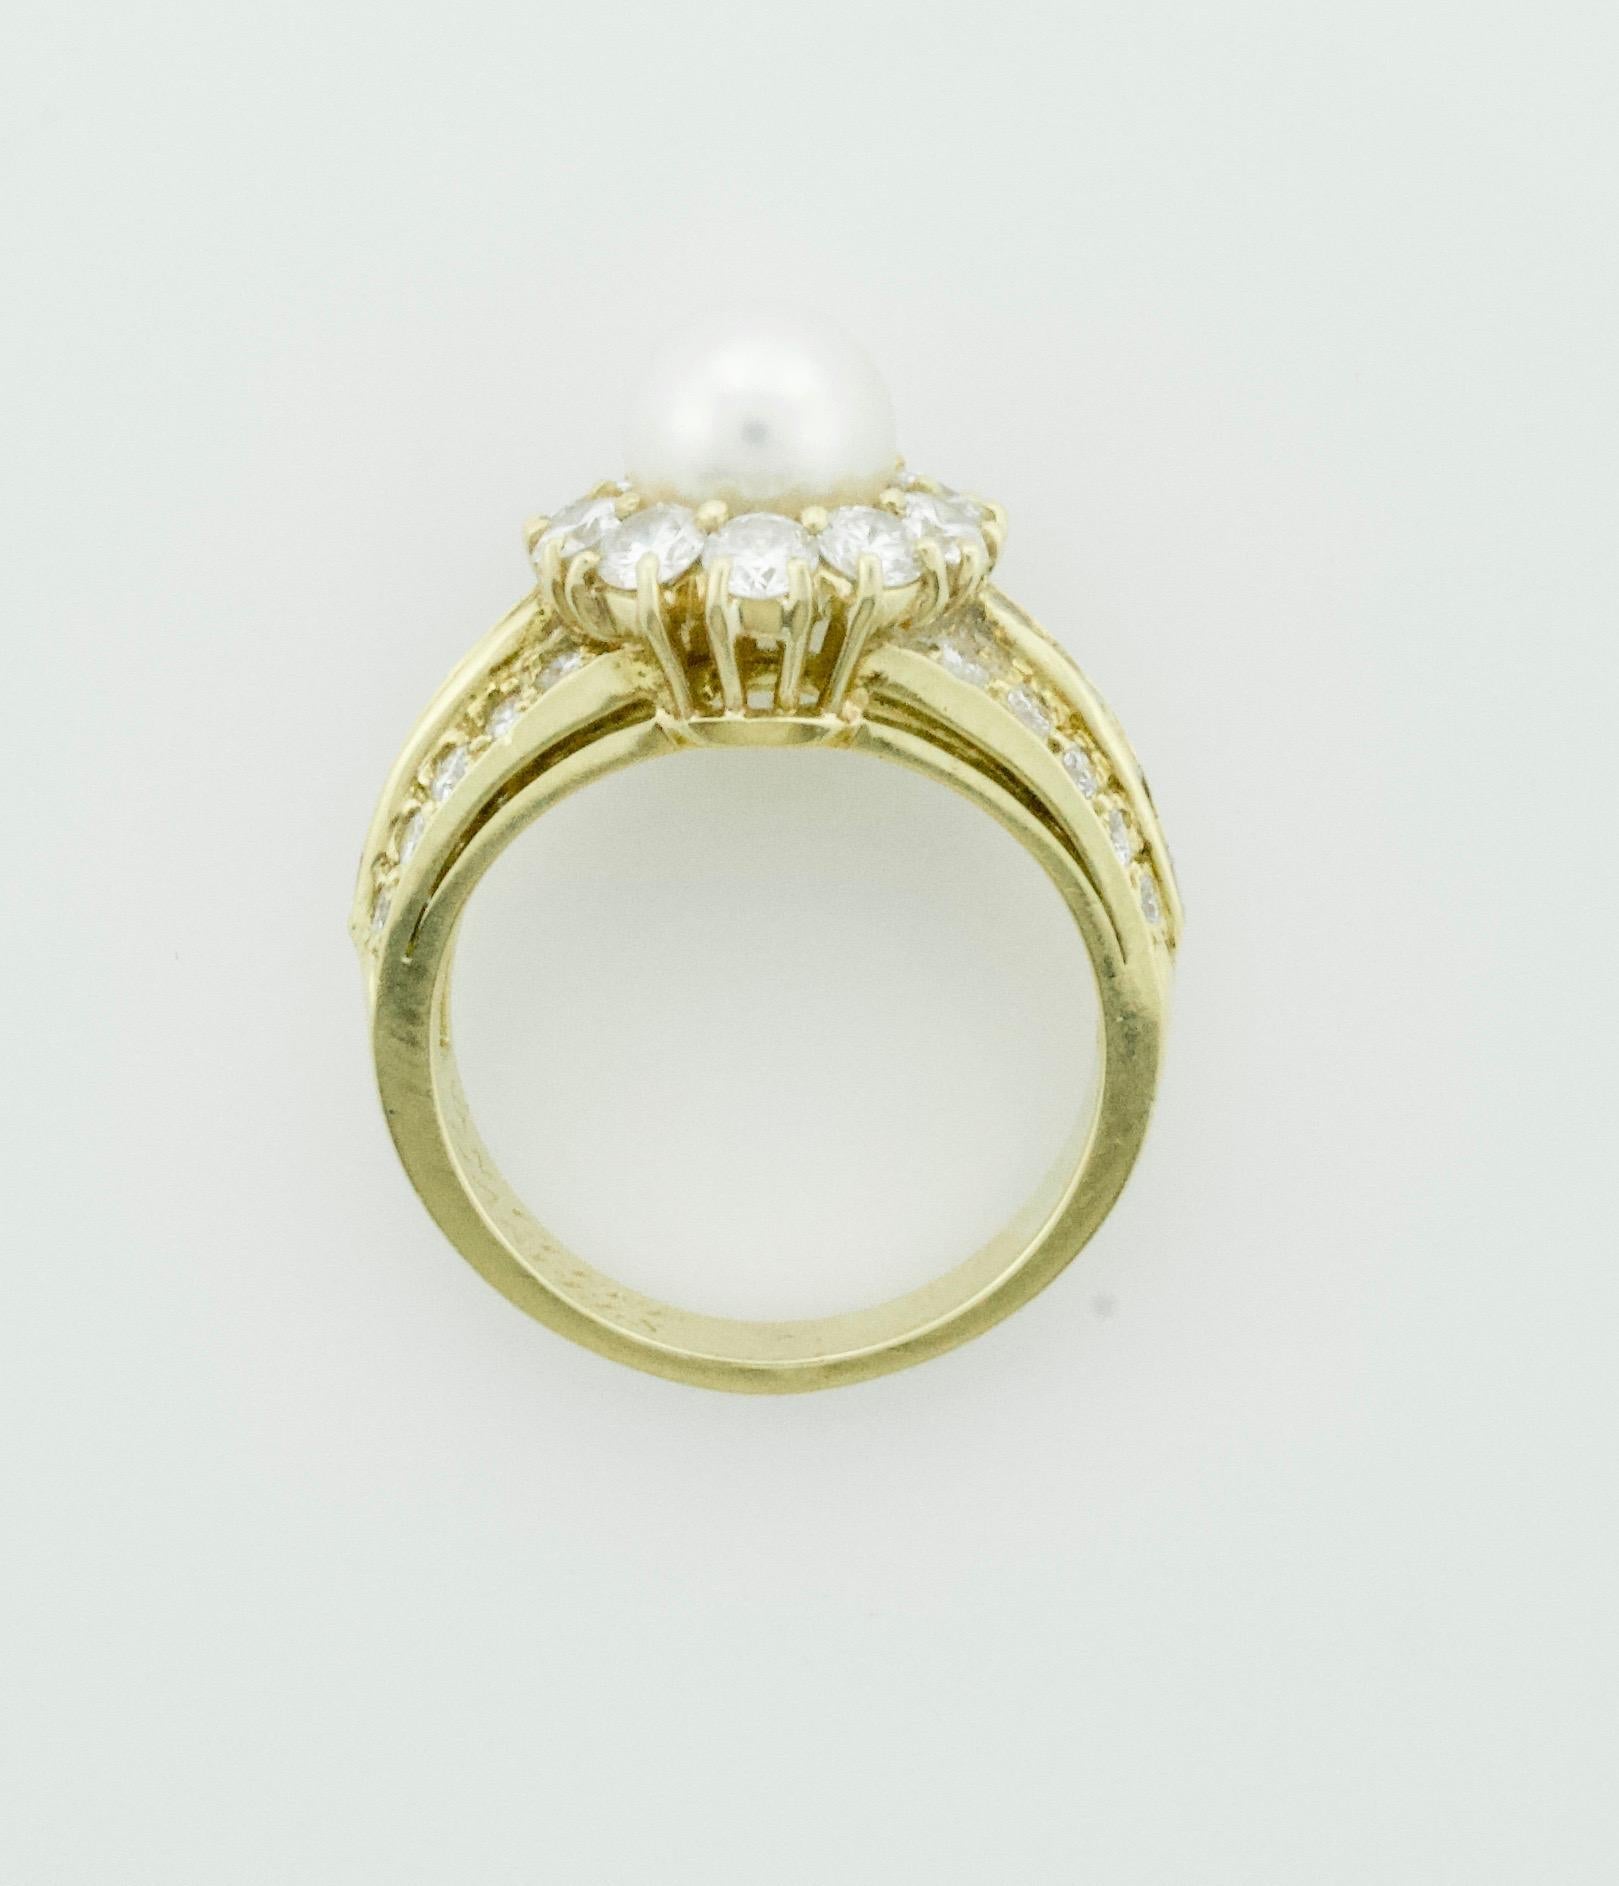 Round Cut Van Cleef & Arpels Pearl and Diamond Ring in 18 Karat Yellow Gold